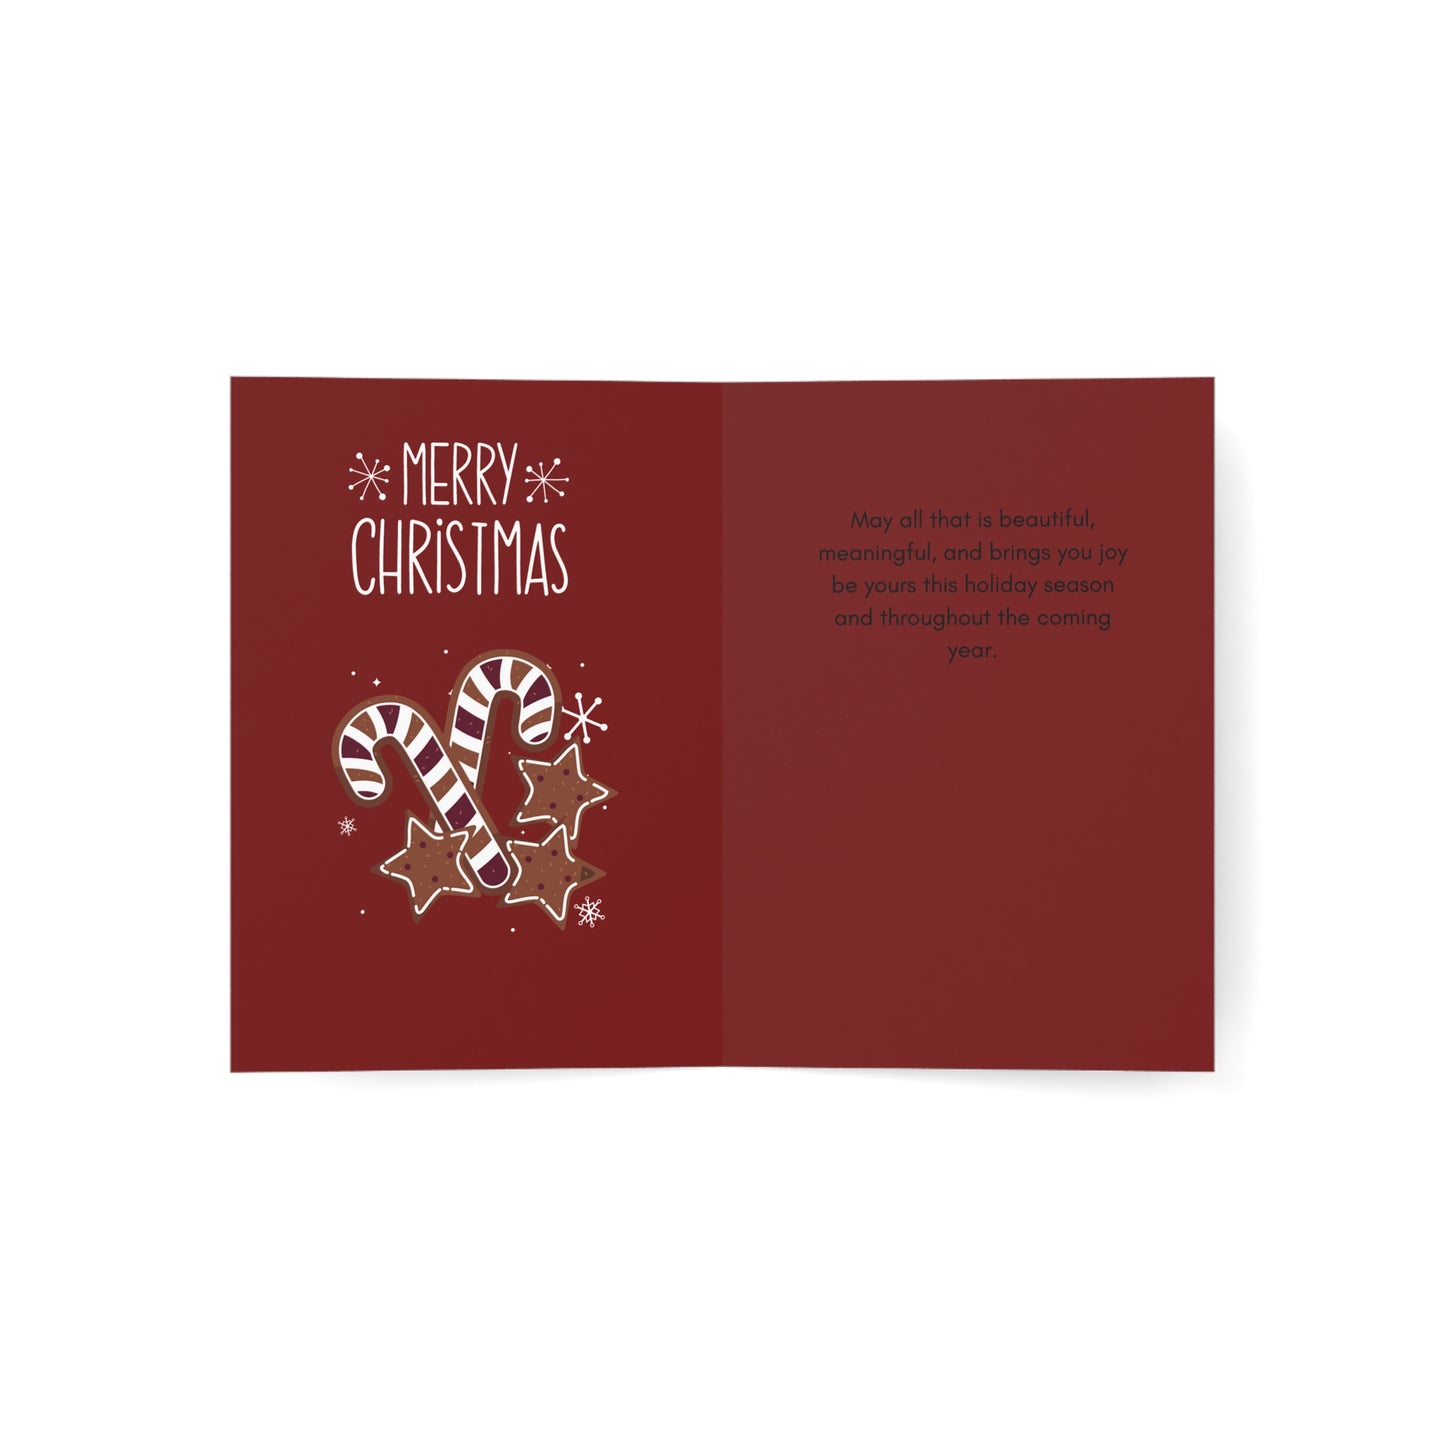 Merry Christmas Greeting Cards (1, 10, 30, and 50pcs)